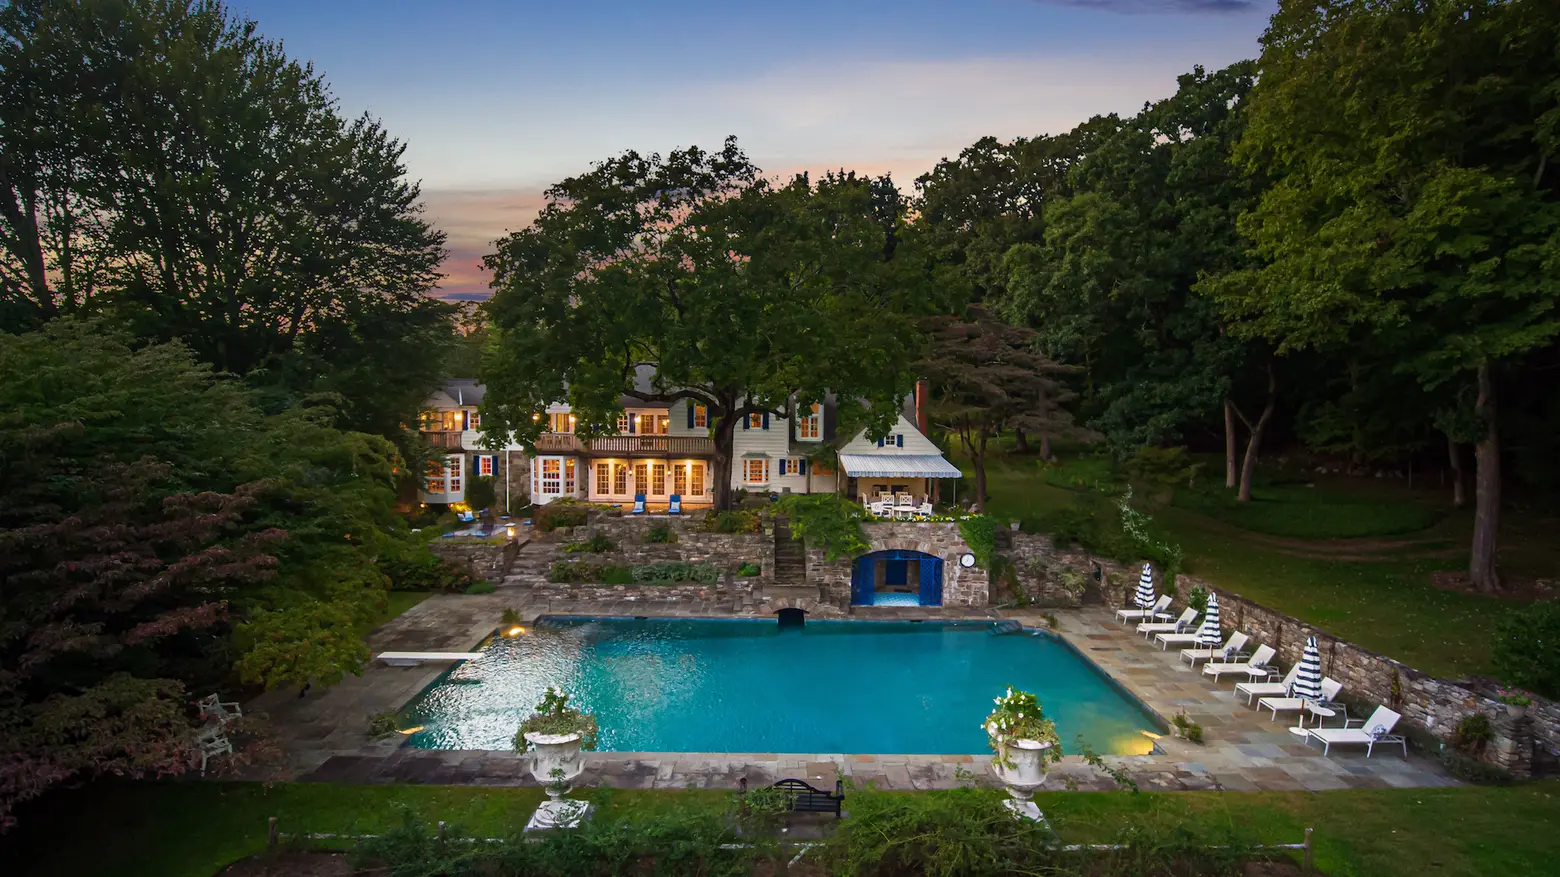 $2.6M English-style estate in Connecticut has a 50-foot underground swim tunnel leading to the pool